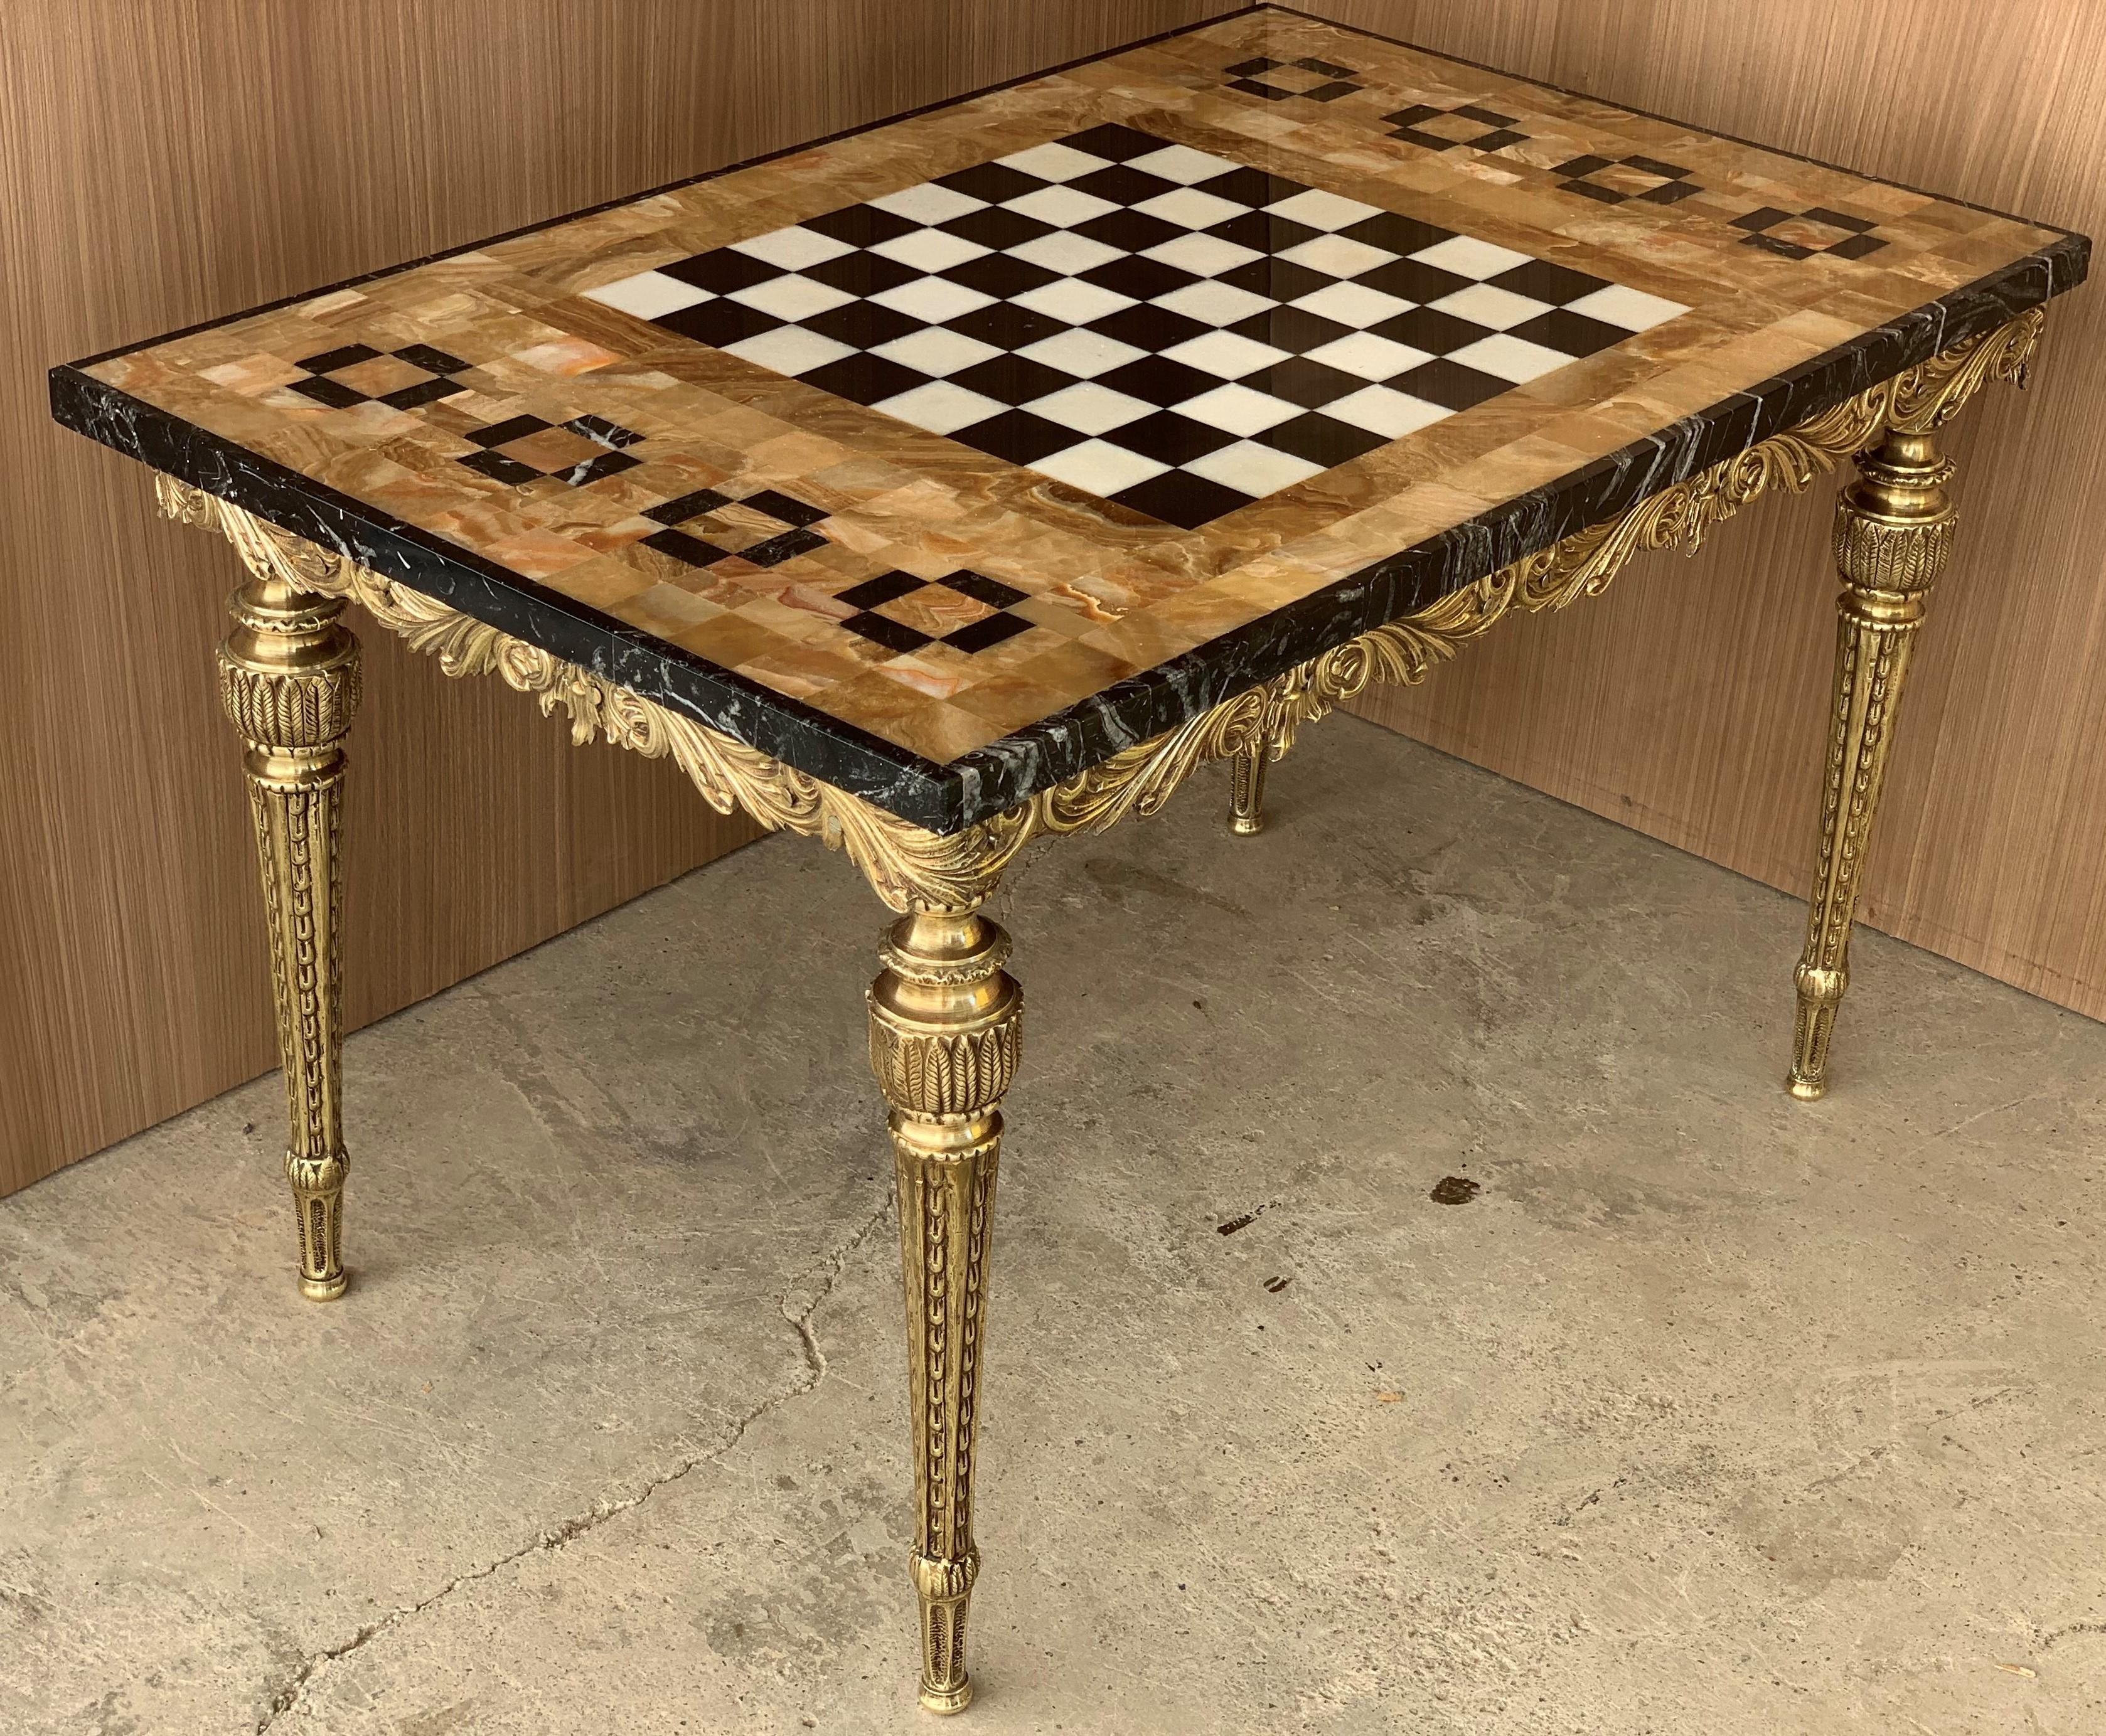 20th Century Ormolu Mounted Bronze Game of Chess with Marble & Onyx Top Table 2